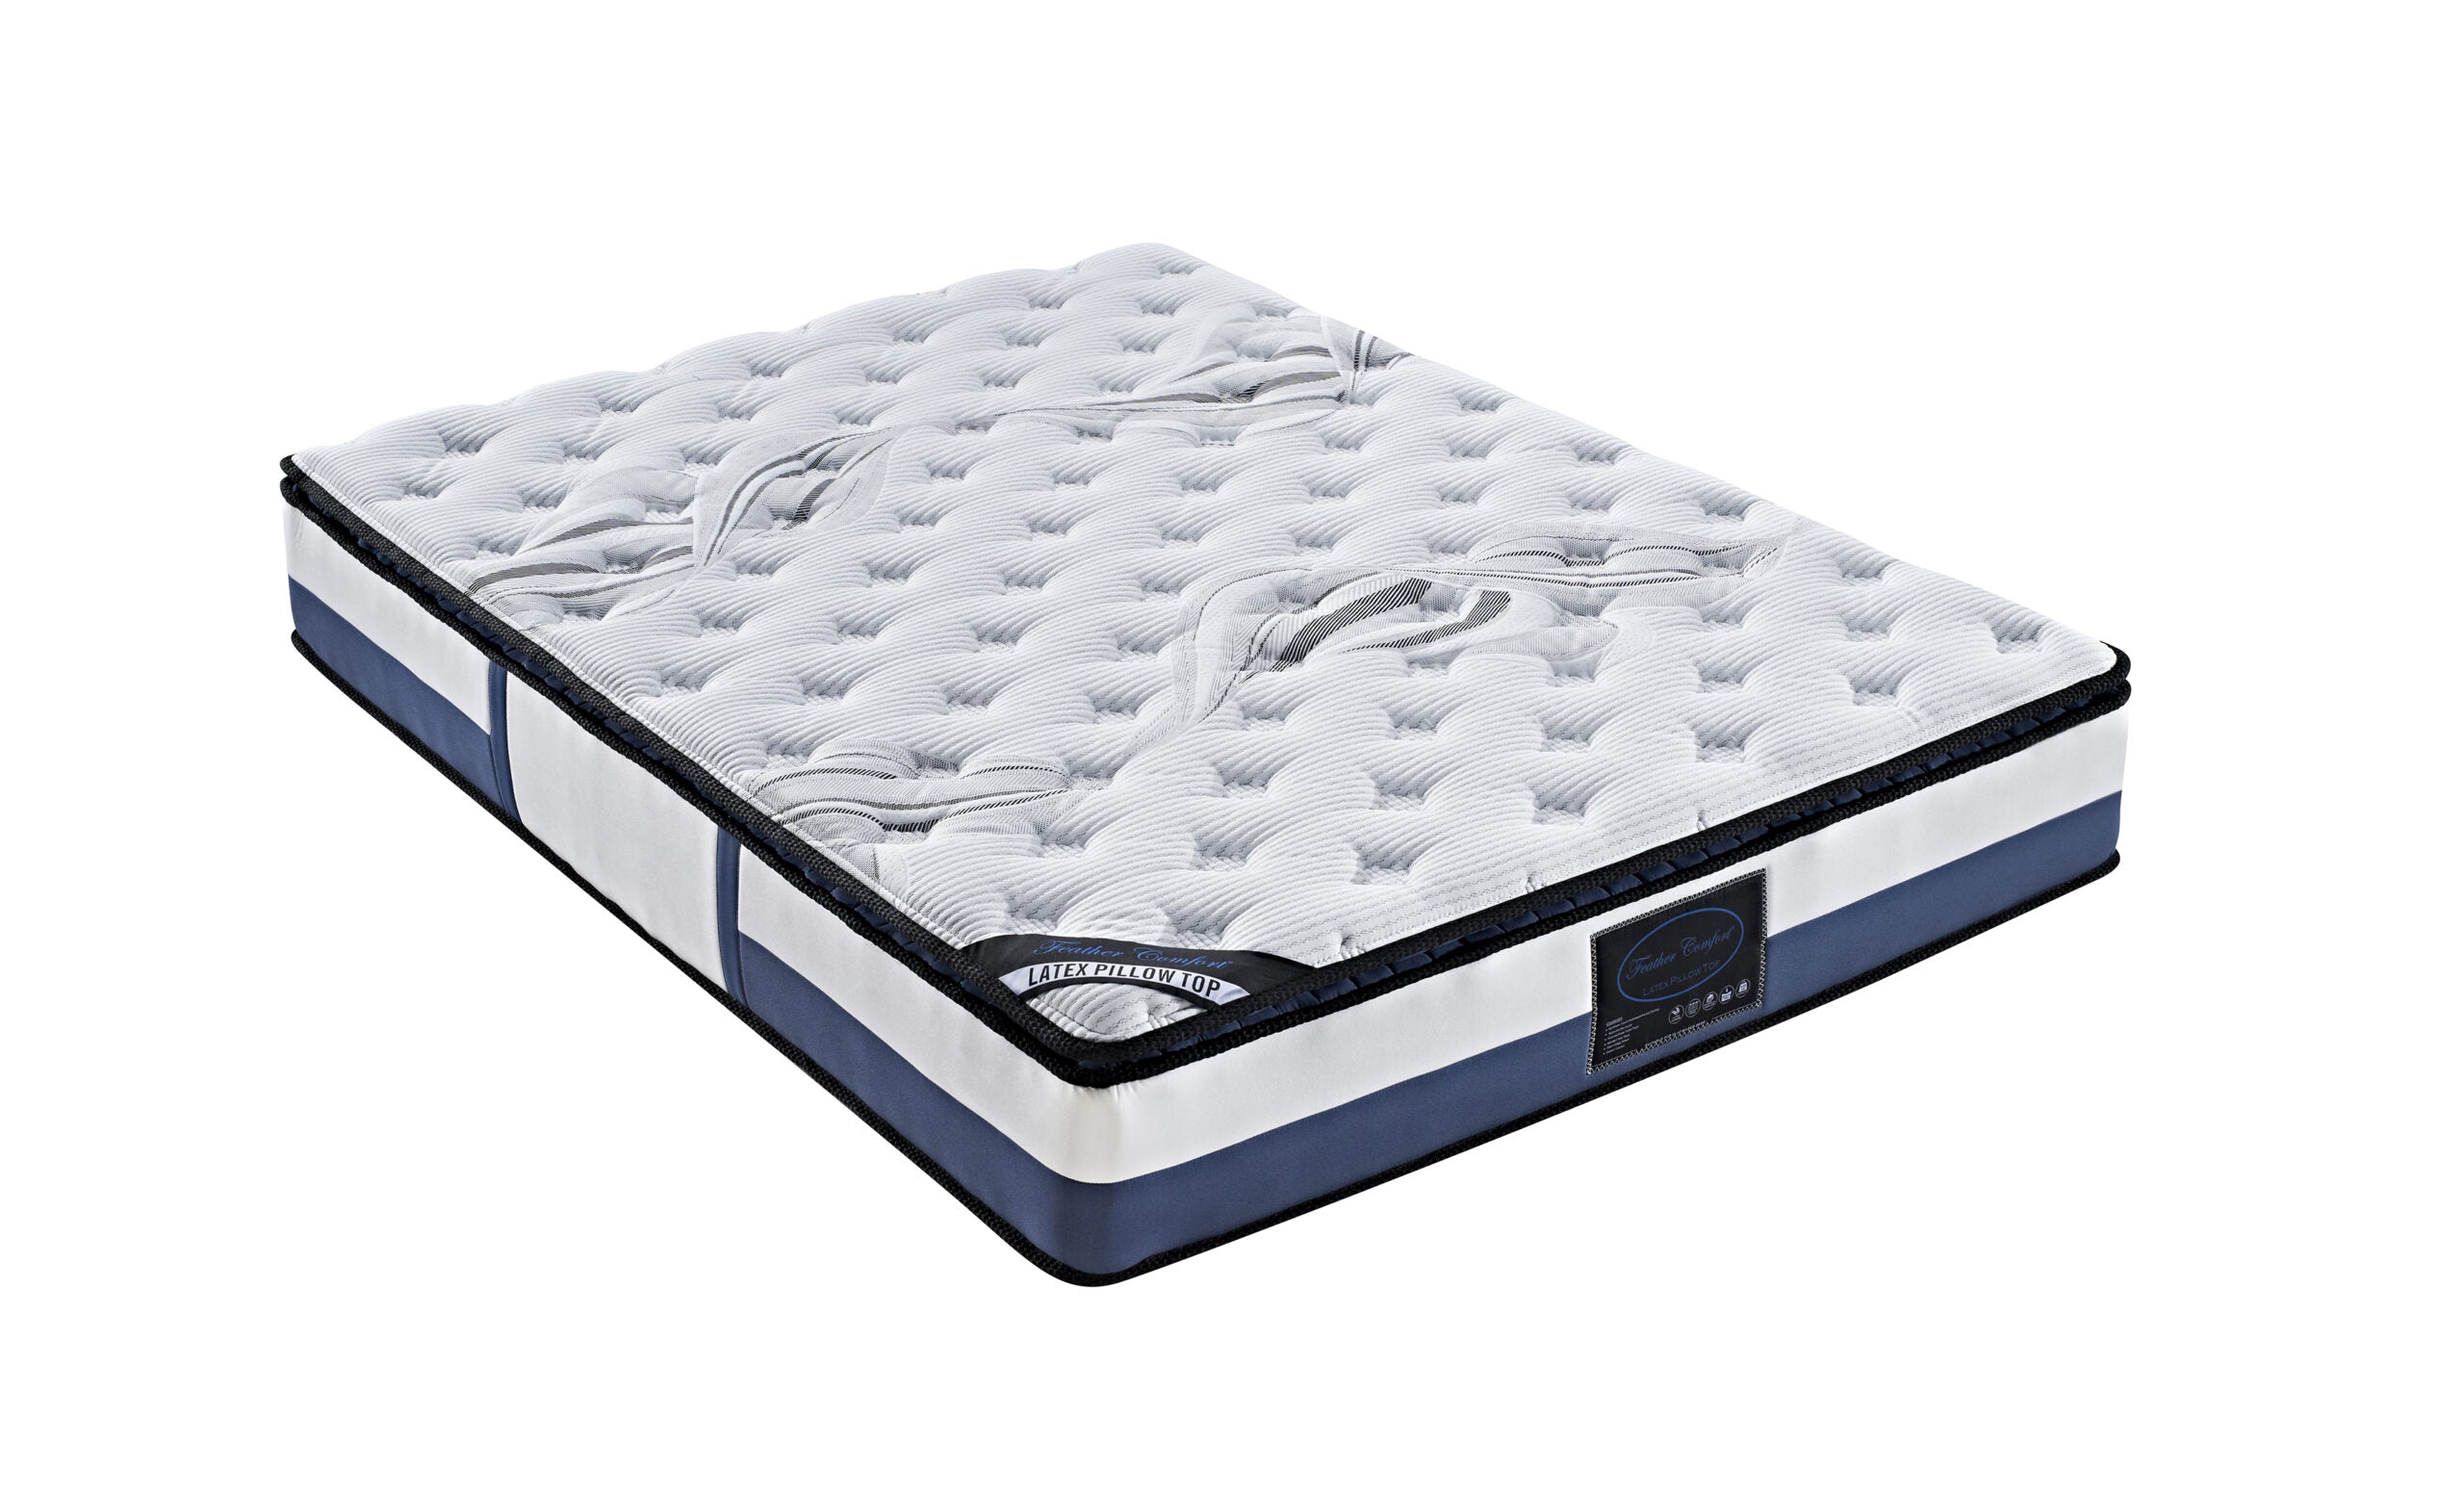 New Latex Pillowtop Rolled up Mattress Double Size